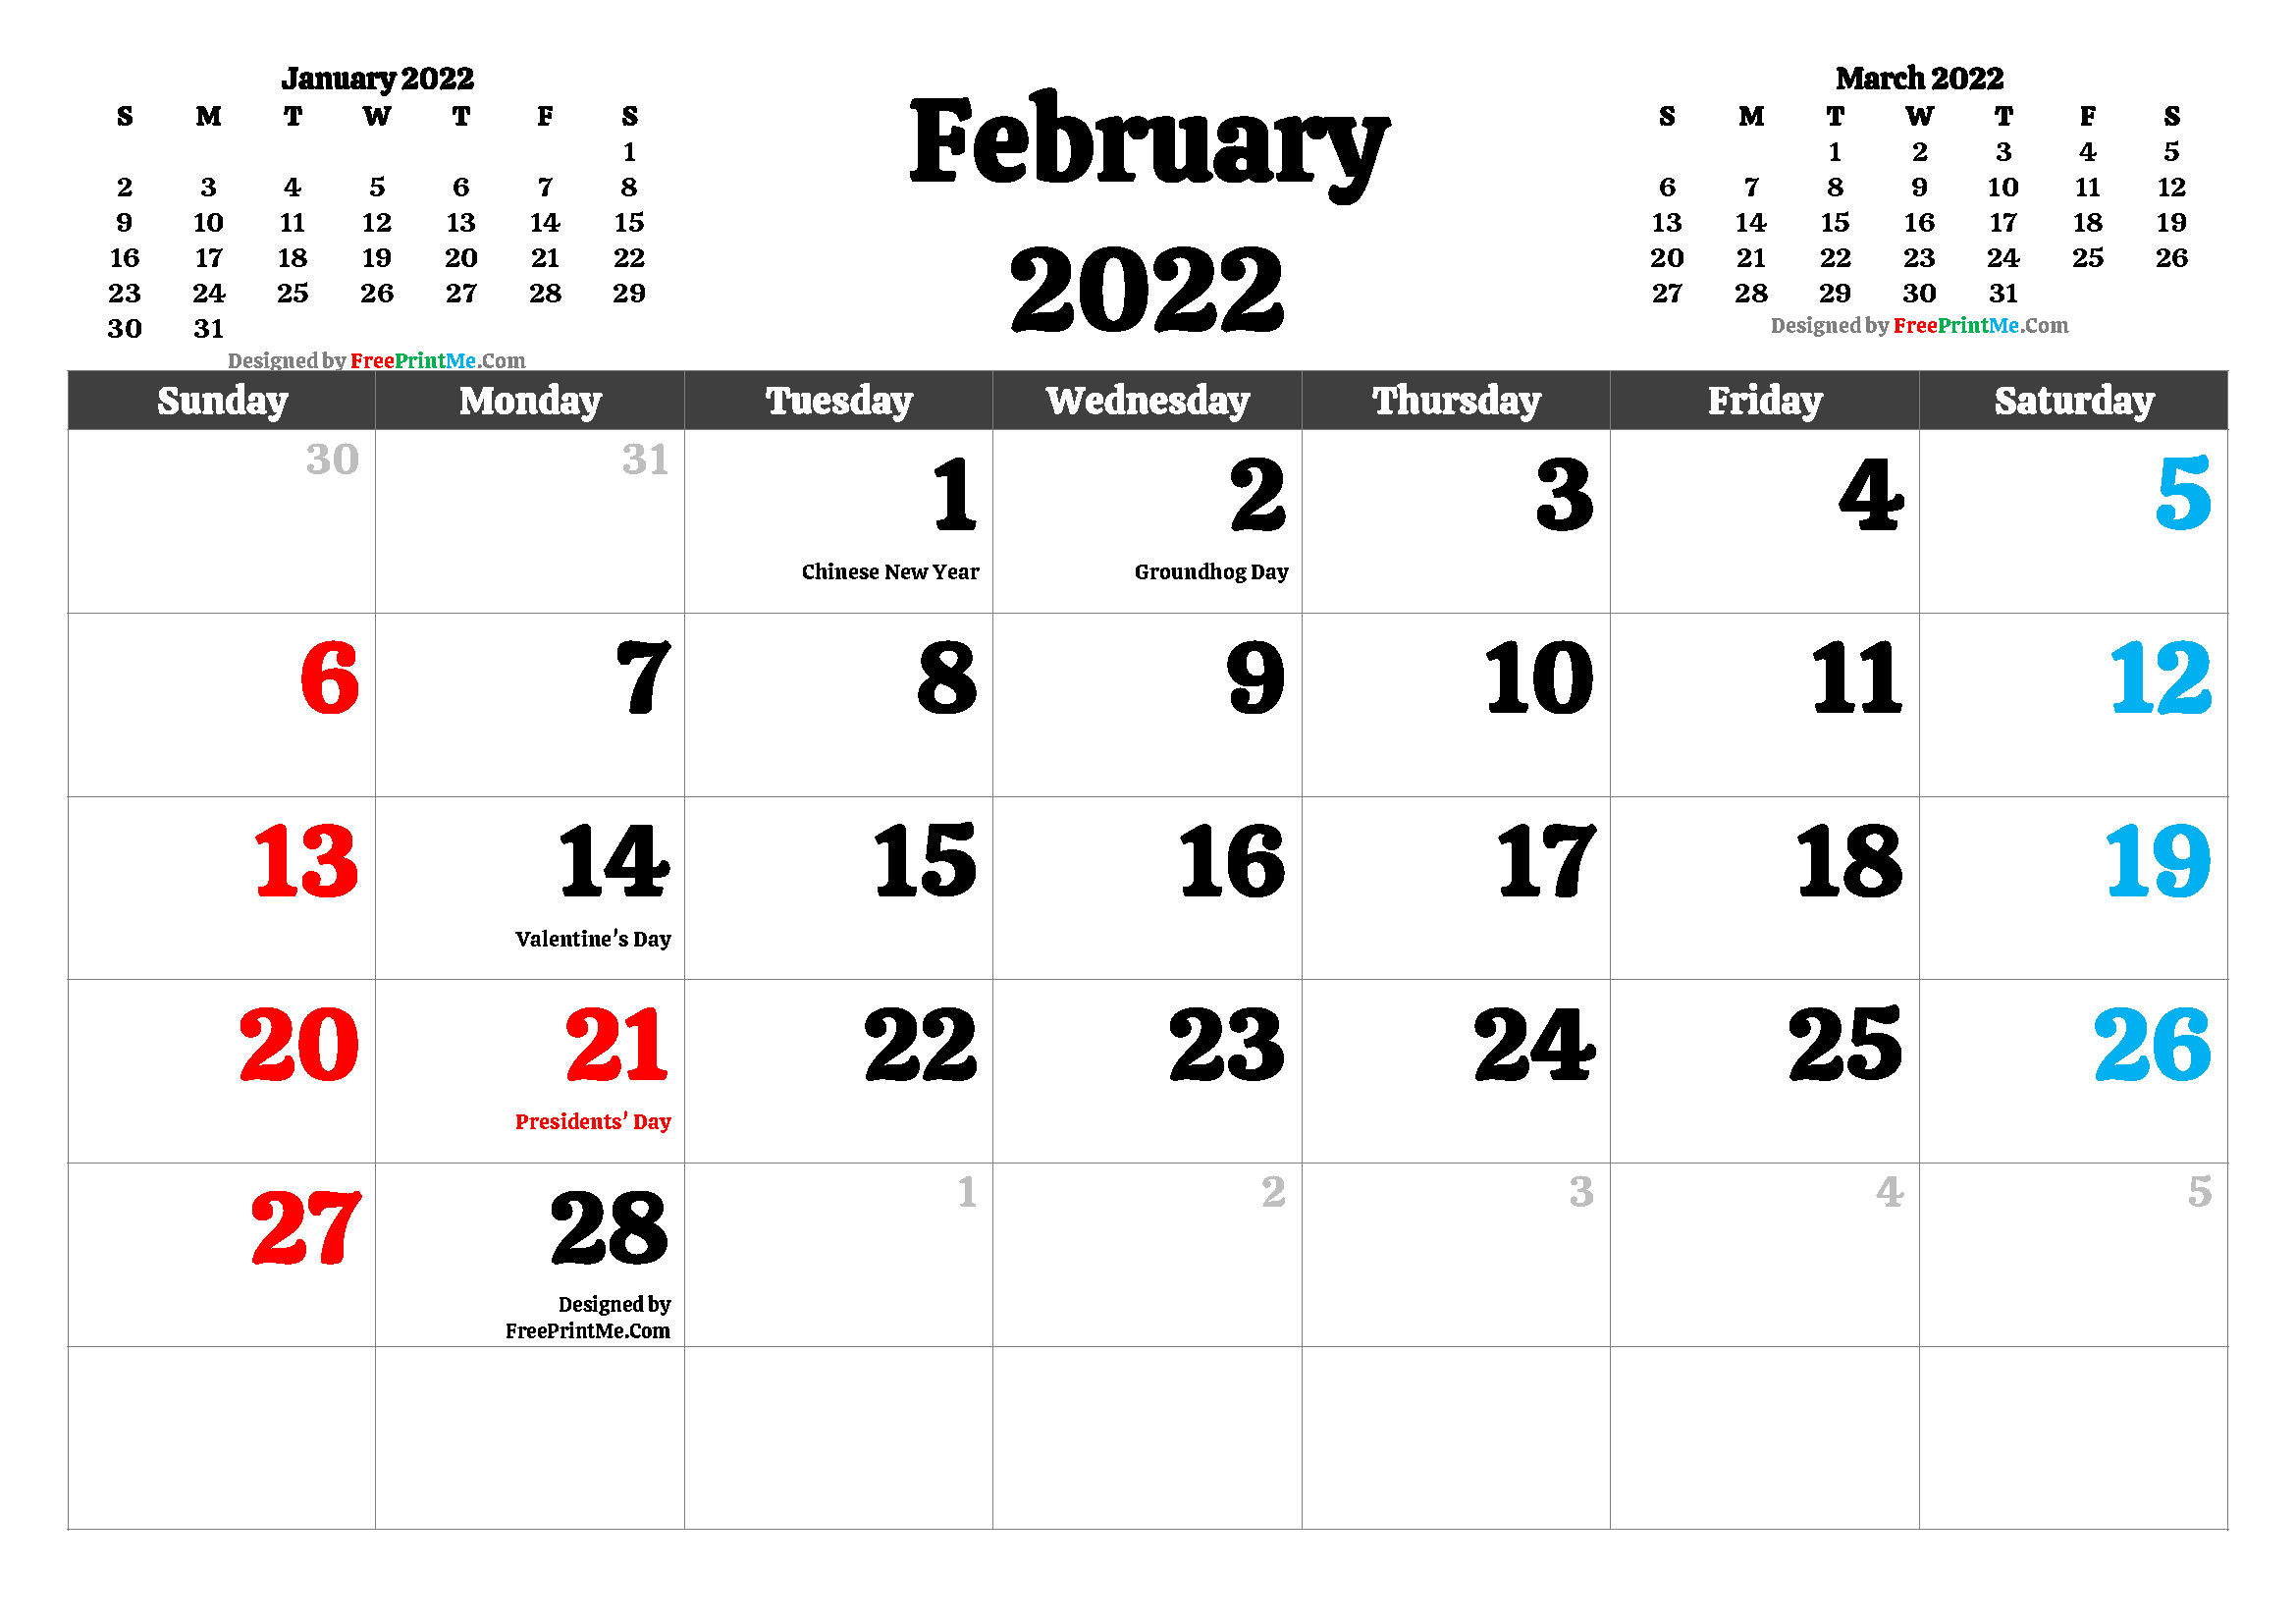 Free Printable February 2022 Calendar All On One Page